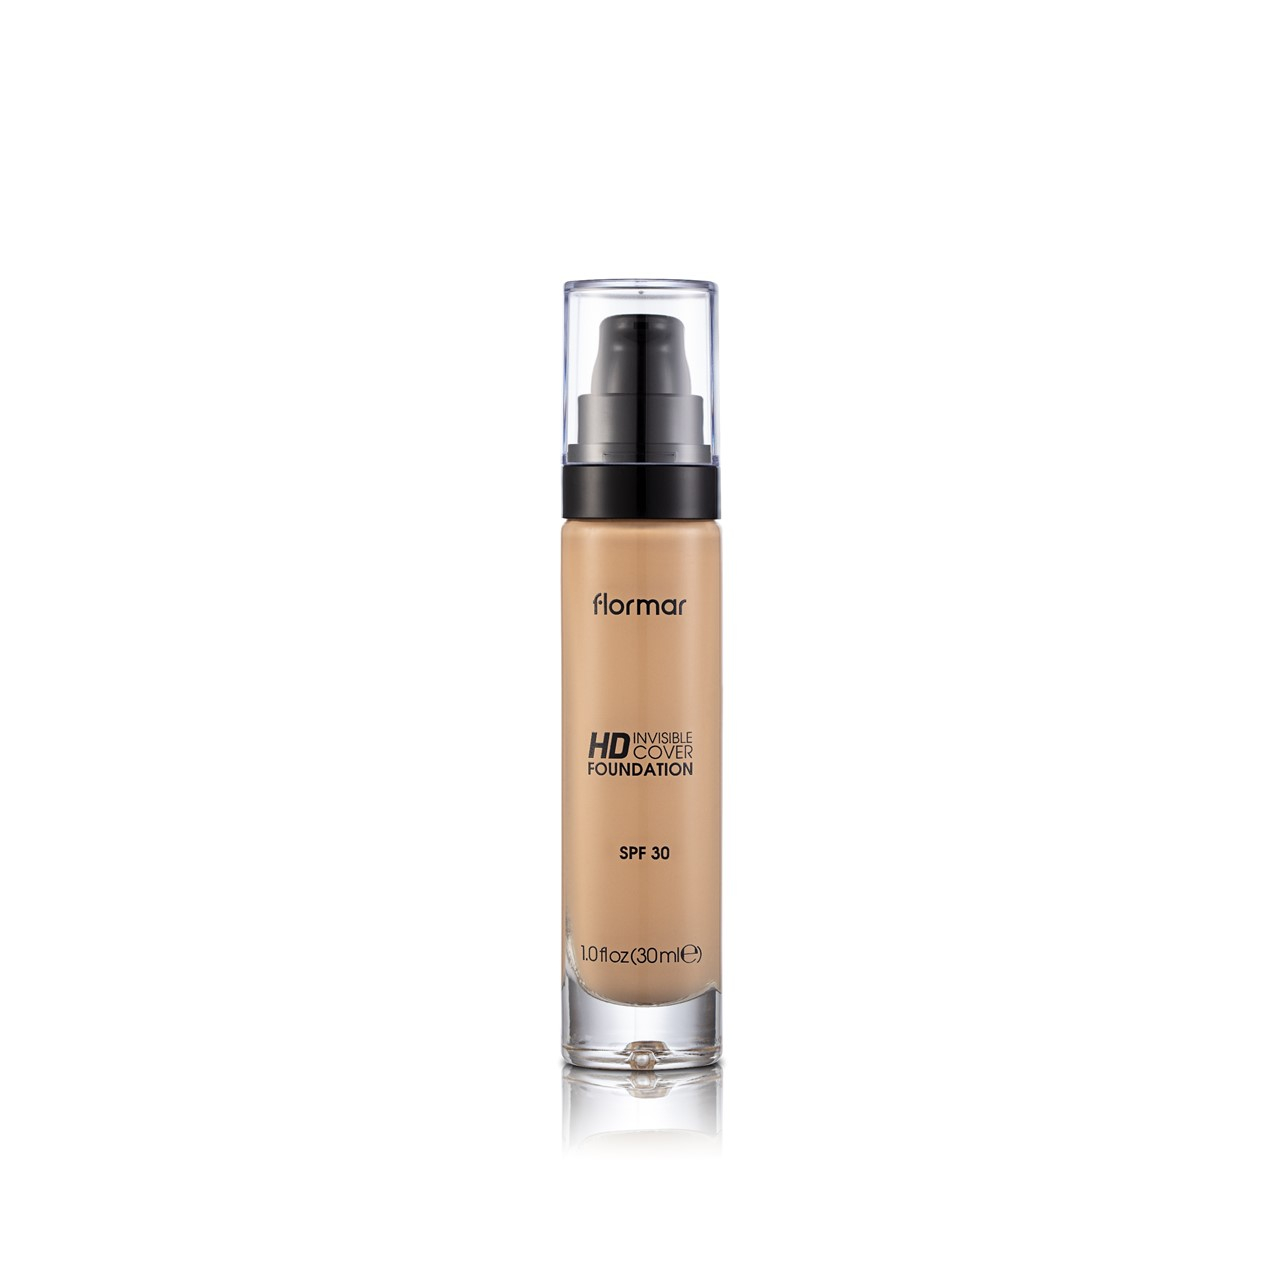 https://static.beautytocare.com/media/catalog/product/f/l/flormar-invisible-cover-hd-foundation-80-soft-beige-spf30-30ml.jpg